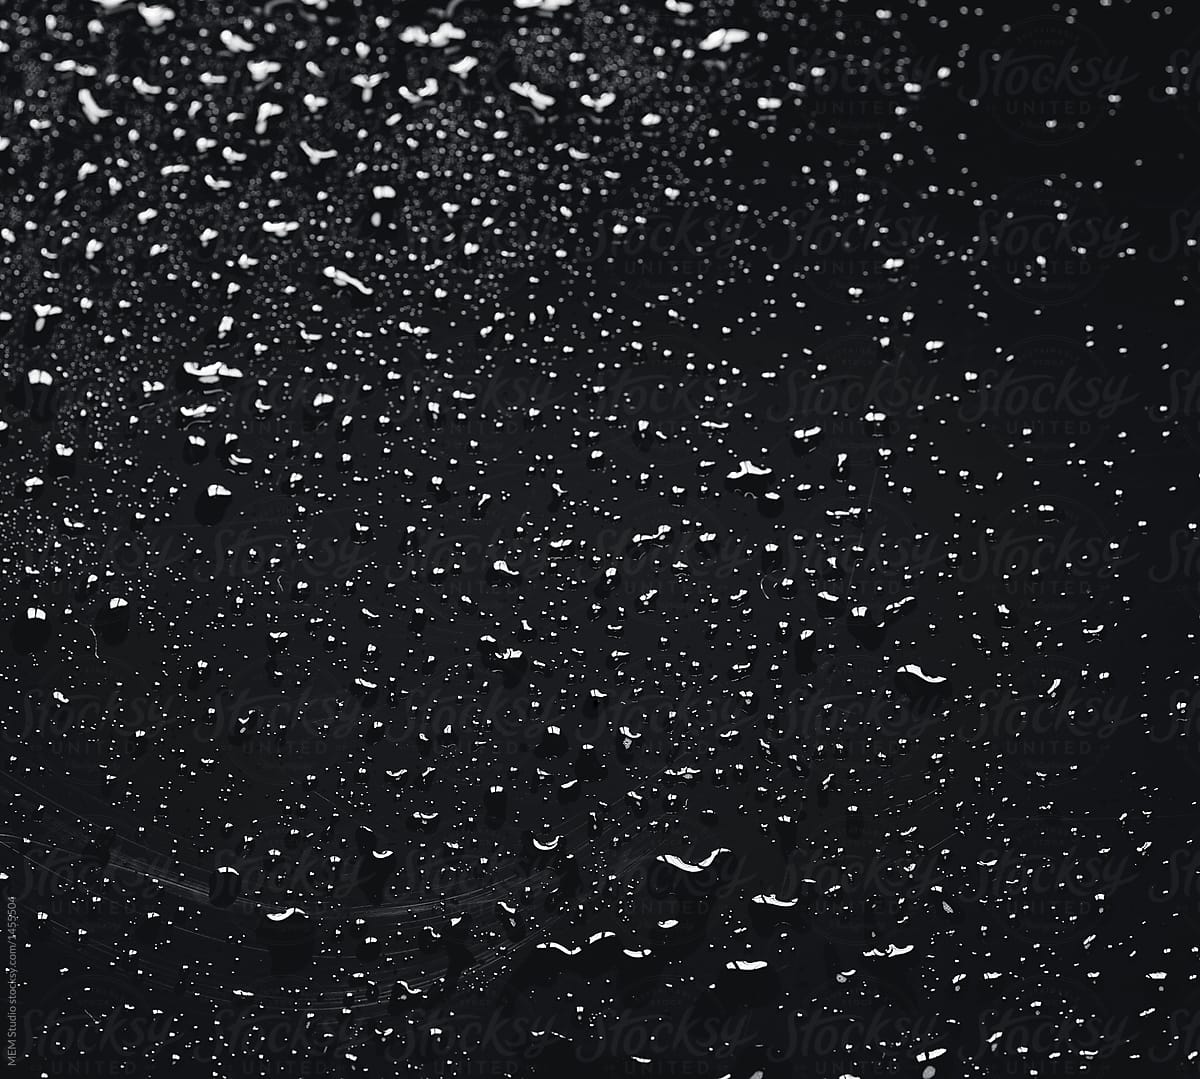 Water drops on a black gloss surface